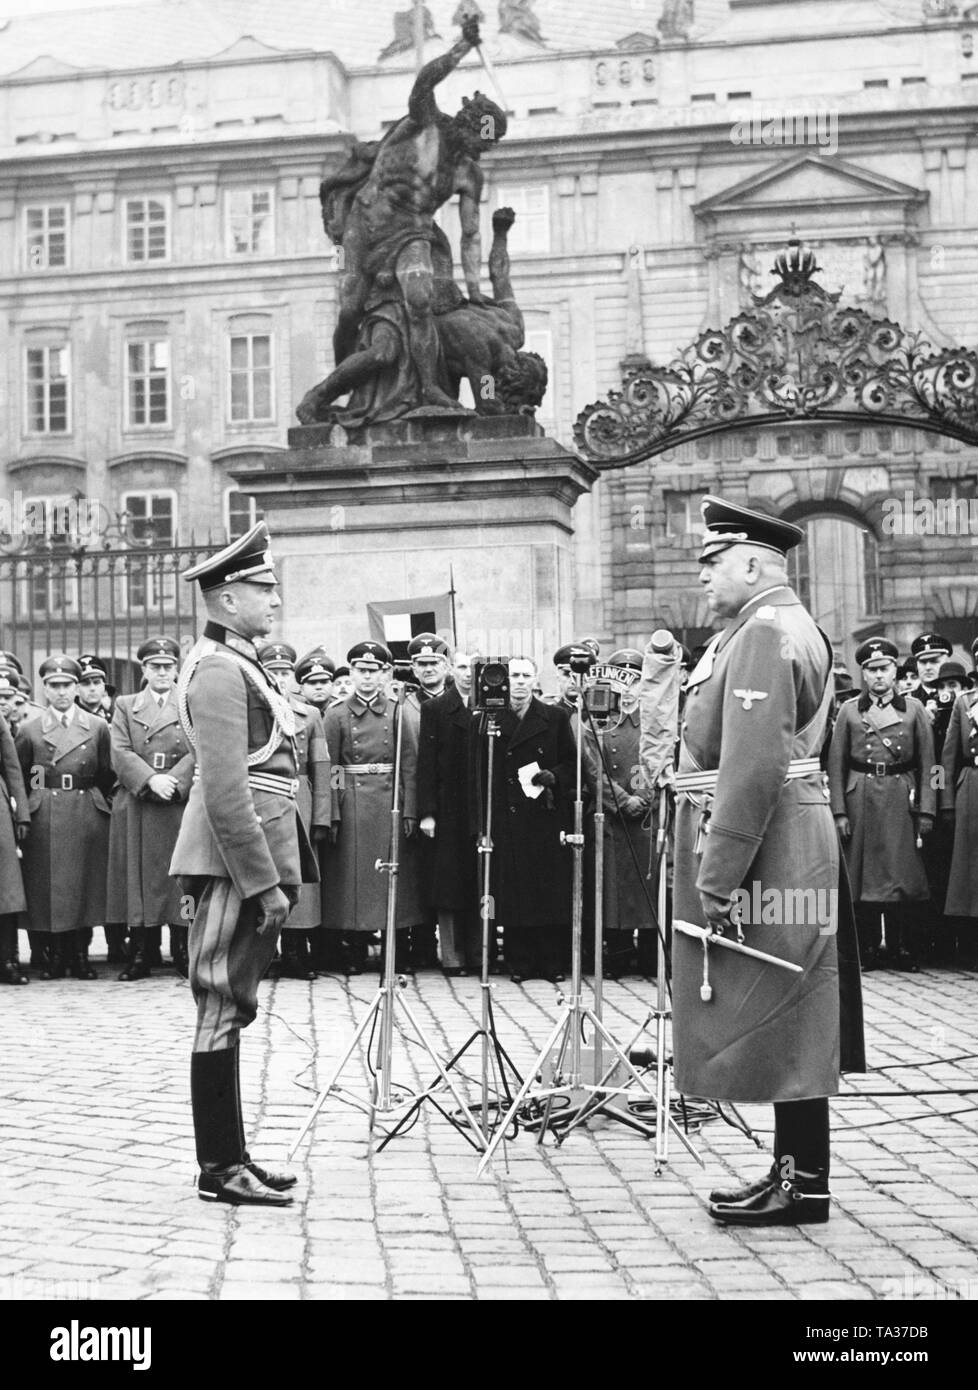 General Walther von Brauchitsch hands over the Protectorate of Bohemia and Moravia to the Reich Protector, Konstantin von Neurath, in front of the Prague Castle. In March 1939, the Wehrmacht occupied the Czech Republic and the First Slovak State was established by Hitler's command. Stock Photo